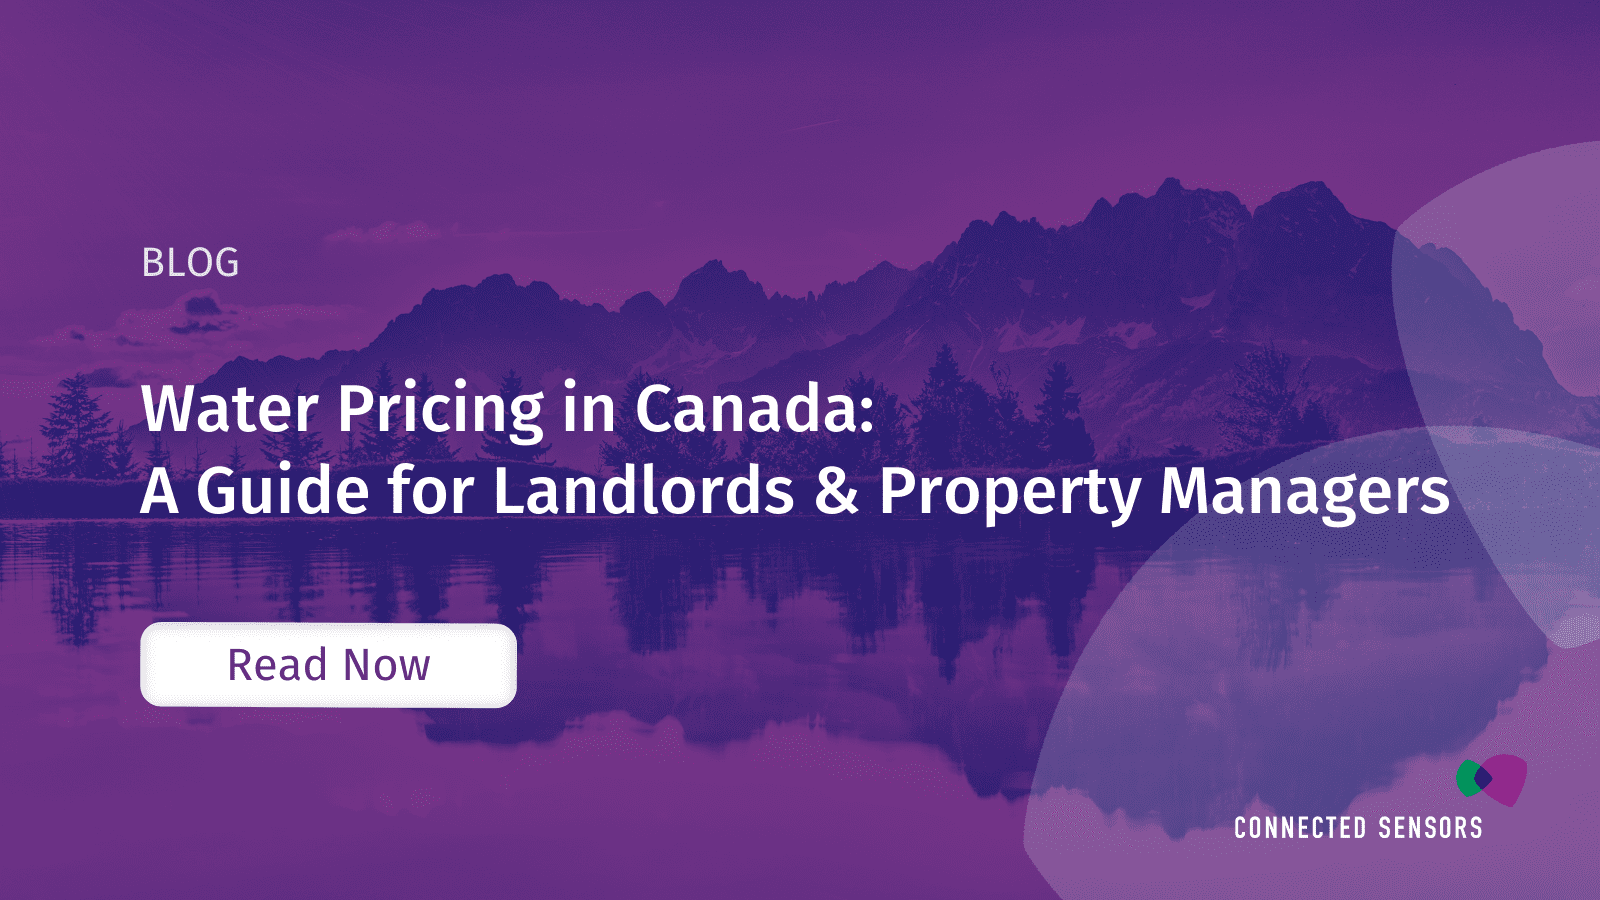 Water Pricing in Canada: What Landlords Should Know